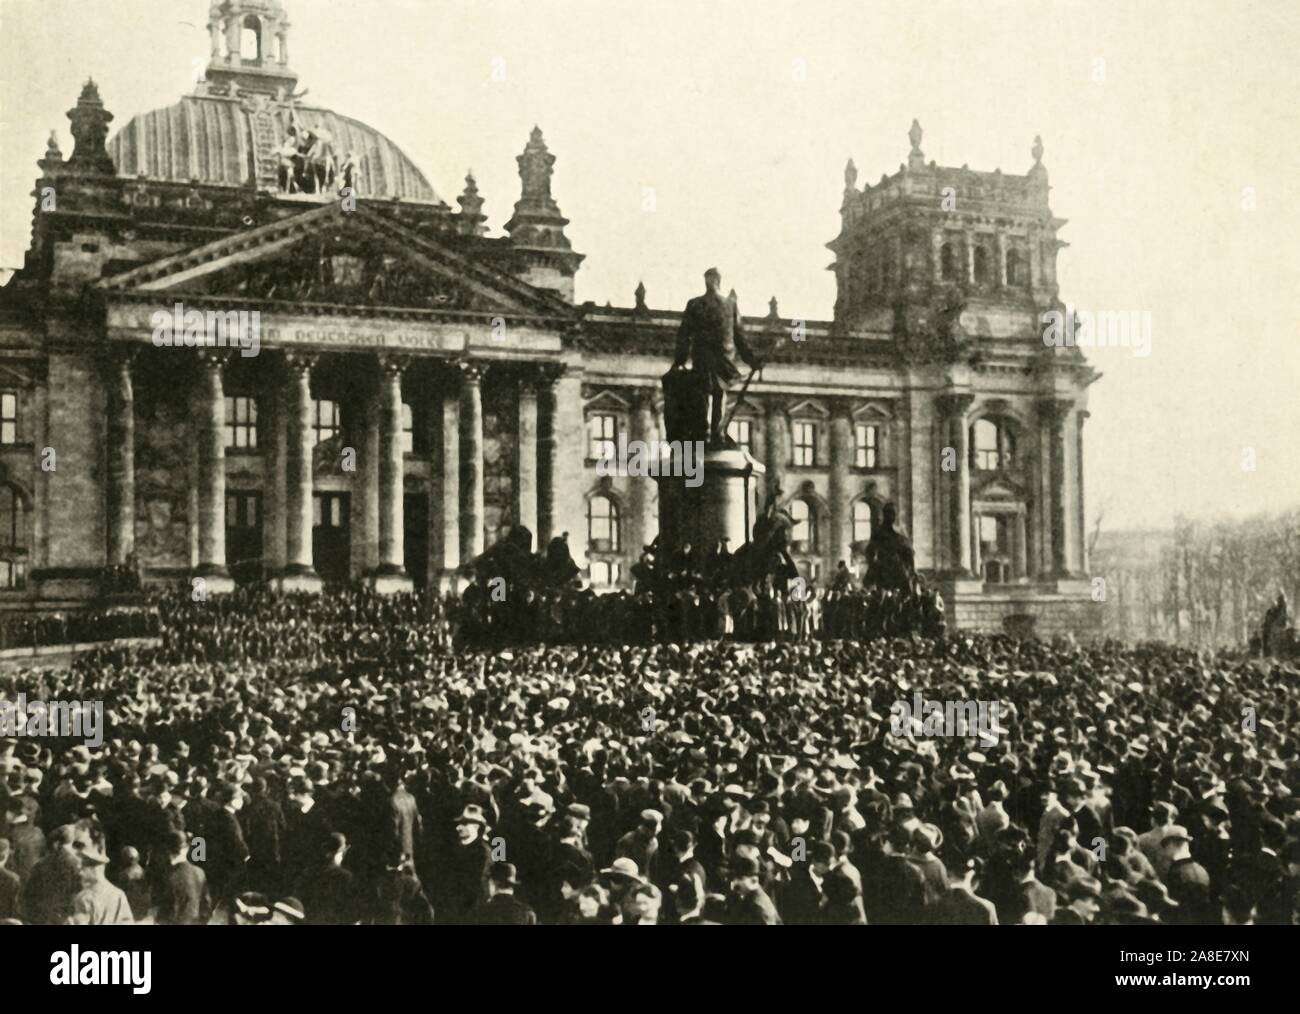 The creation of a new German republic, Reichstag, Berlin, 9 November 1918, (c1920). 'Berlin under the new Regime...scene outside the Reichstag during Herr Scheidemann's proclamation of a republic'. Philipp Scheidemann (1865-1939) speaking from the Reichstag at the end of the First World War. He served as the first Chancellor of the Weimar Republic, holding office from February until June 1919. From &quot;The Great World War: A History&quot;, Volume IX, edited by Frank A Mumby. [The Gresham Publishing Company Ltd, London, c1920] Stock Photo